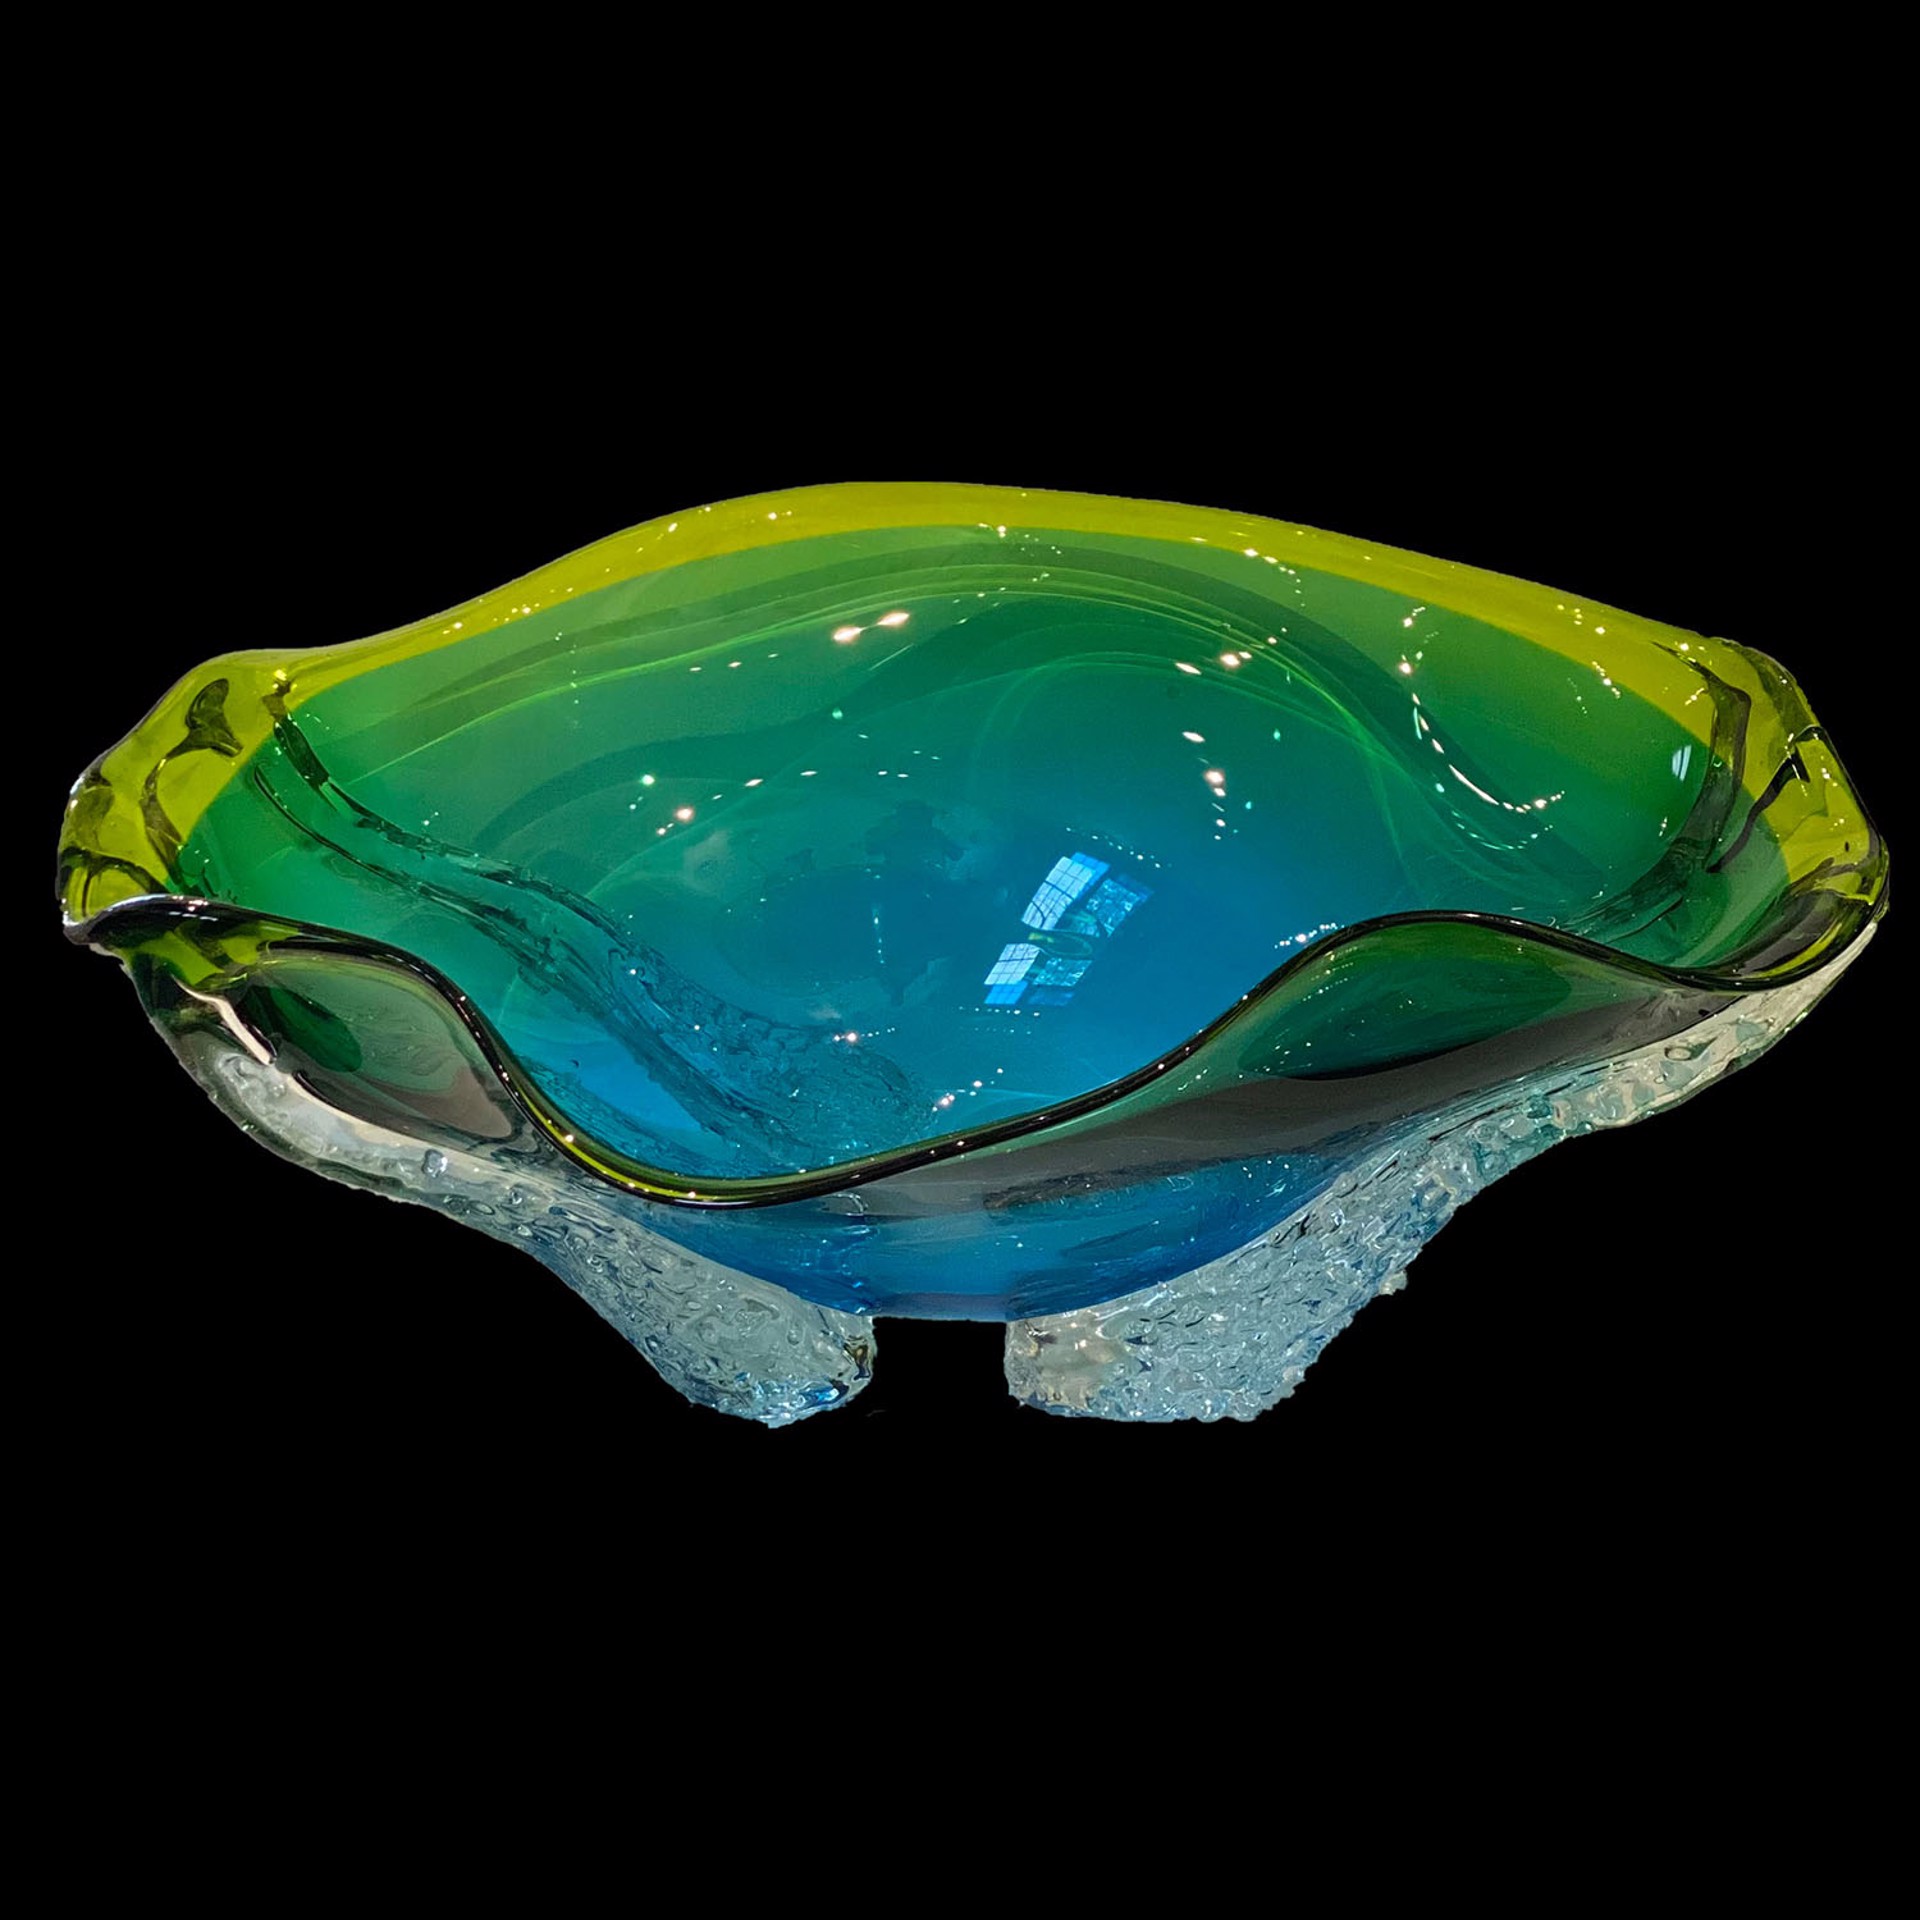 Blue, Green & Yellow Octo Bowl by Will Dexter